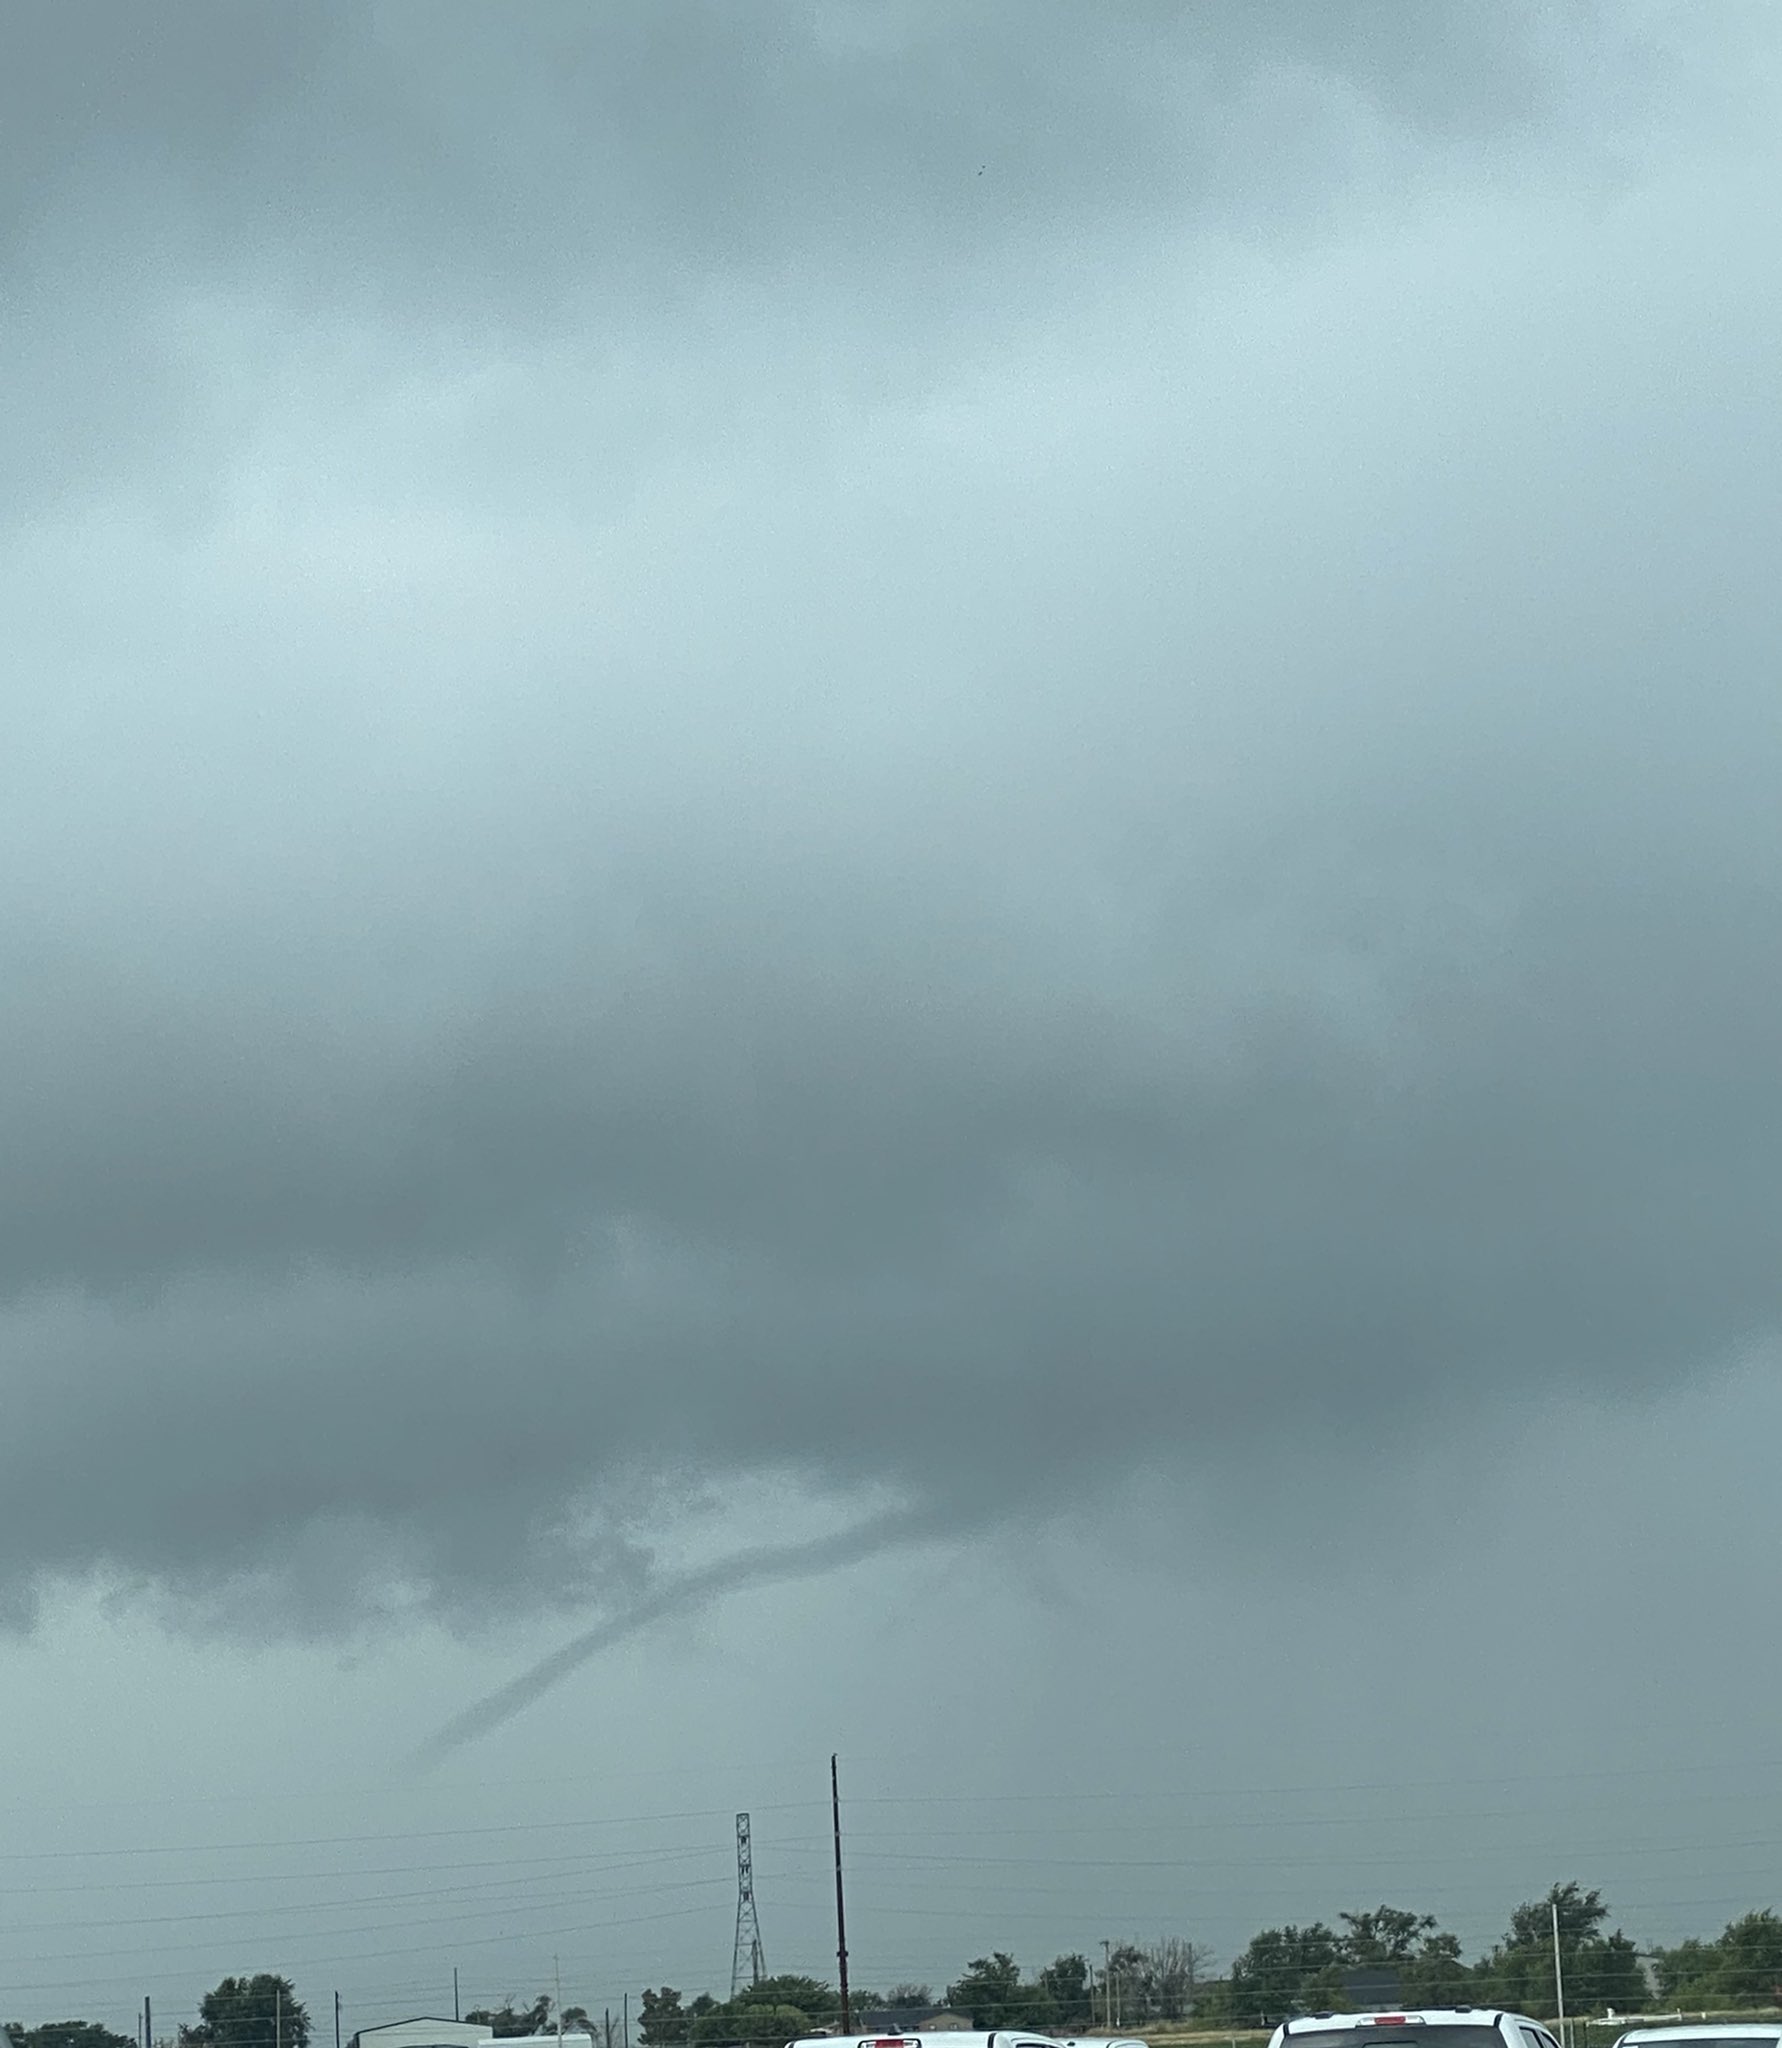 Funnel cloud near the southeast side of Lubbock around 1 pm on Wednesday (31 August). The picture is courtesy of Nick Alvarado.